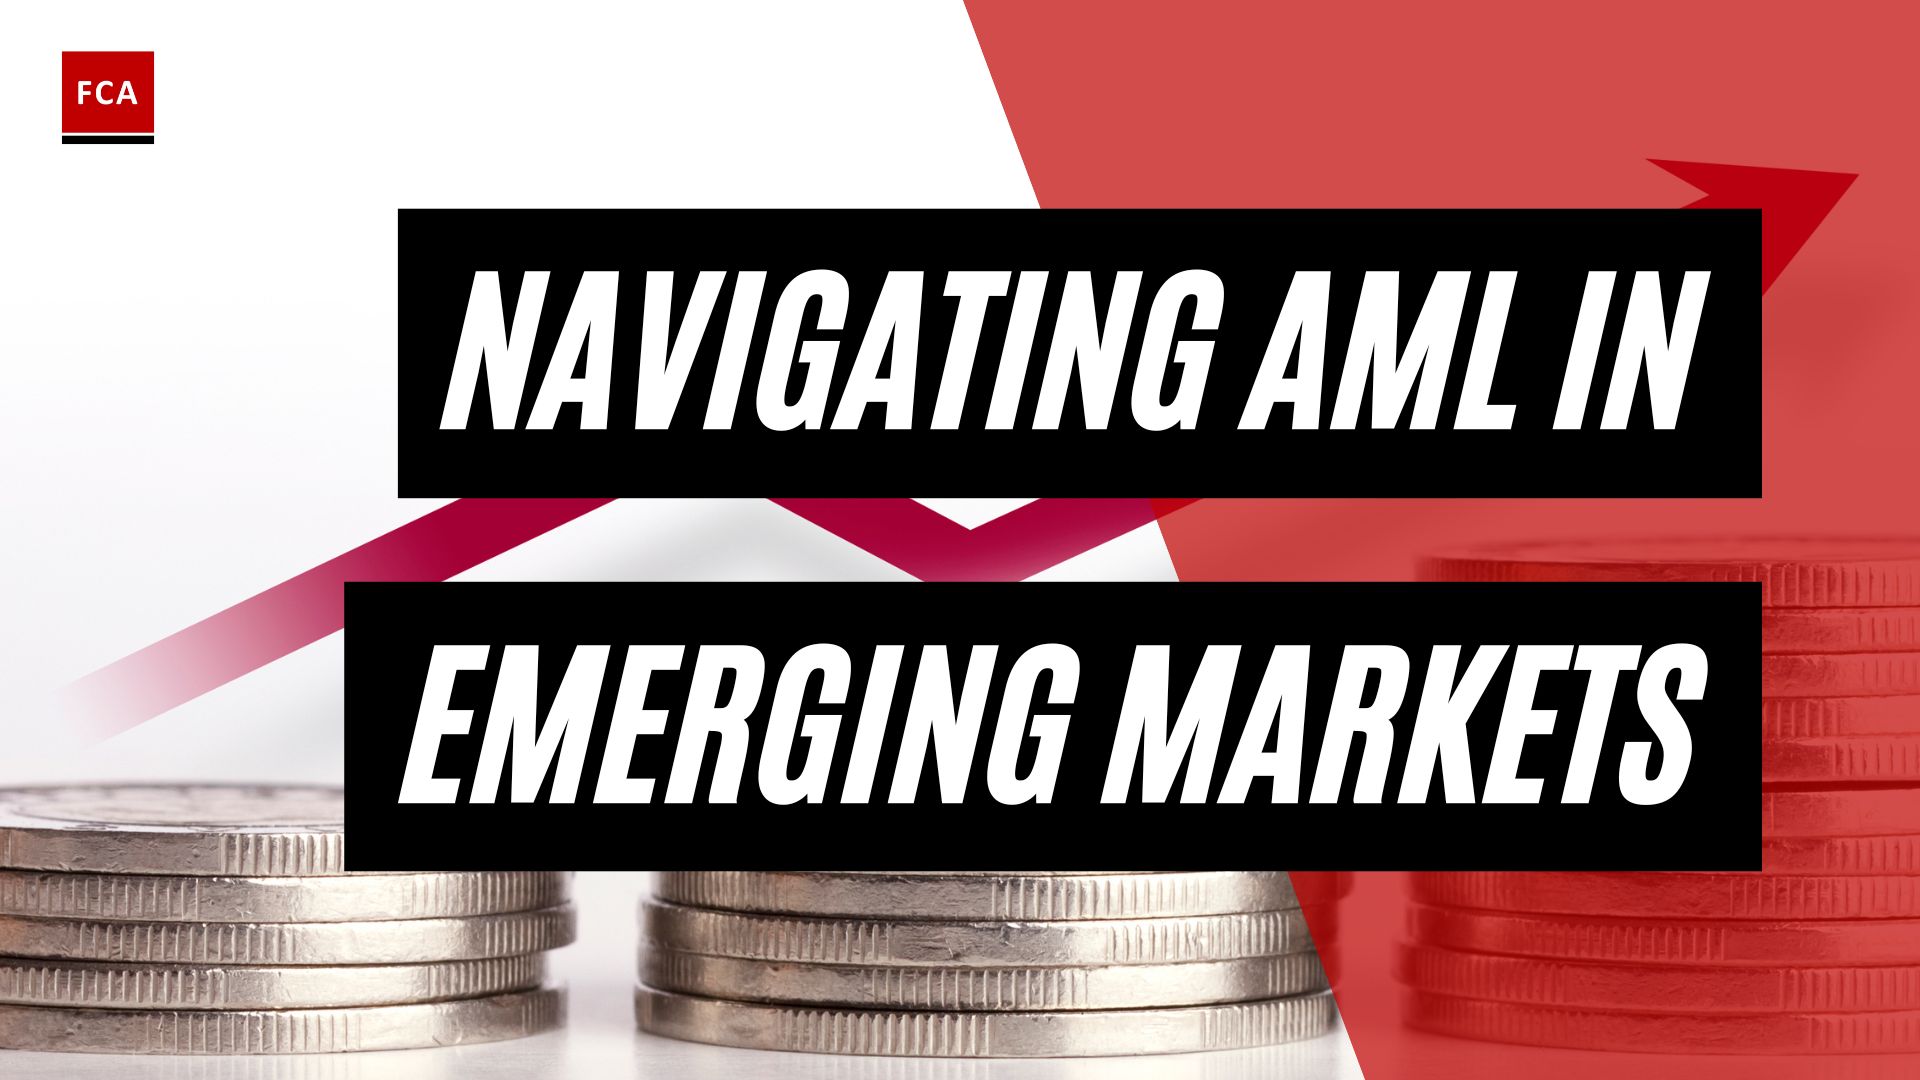 Staying Ahead Of The Game: Aml Compliance Strategies For Emerging Markets